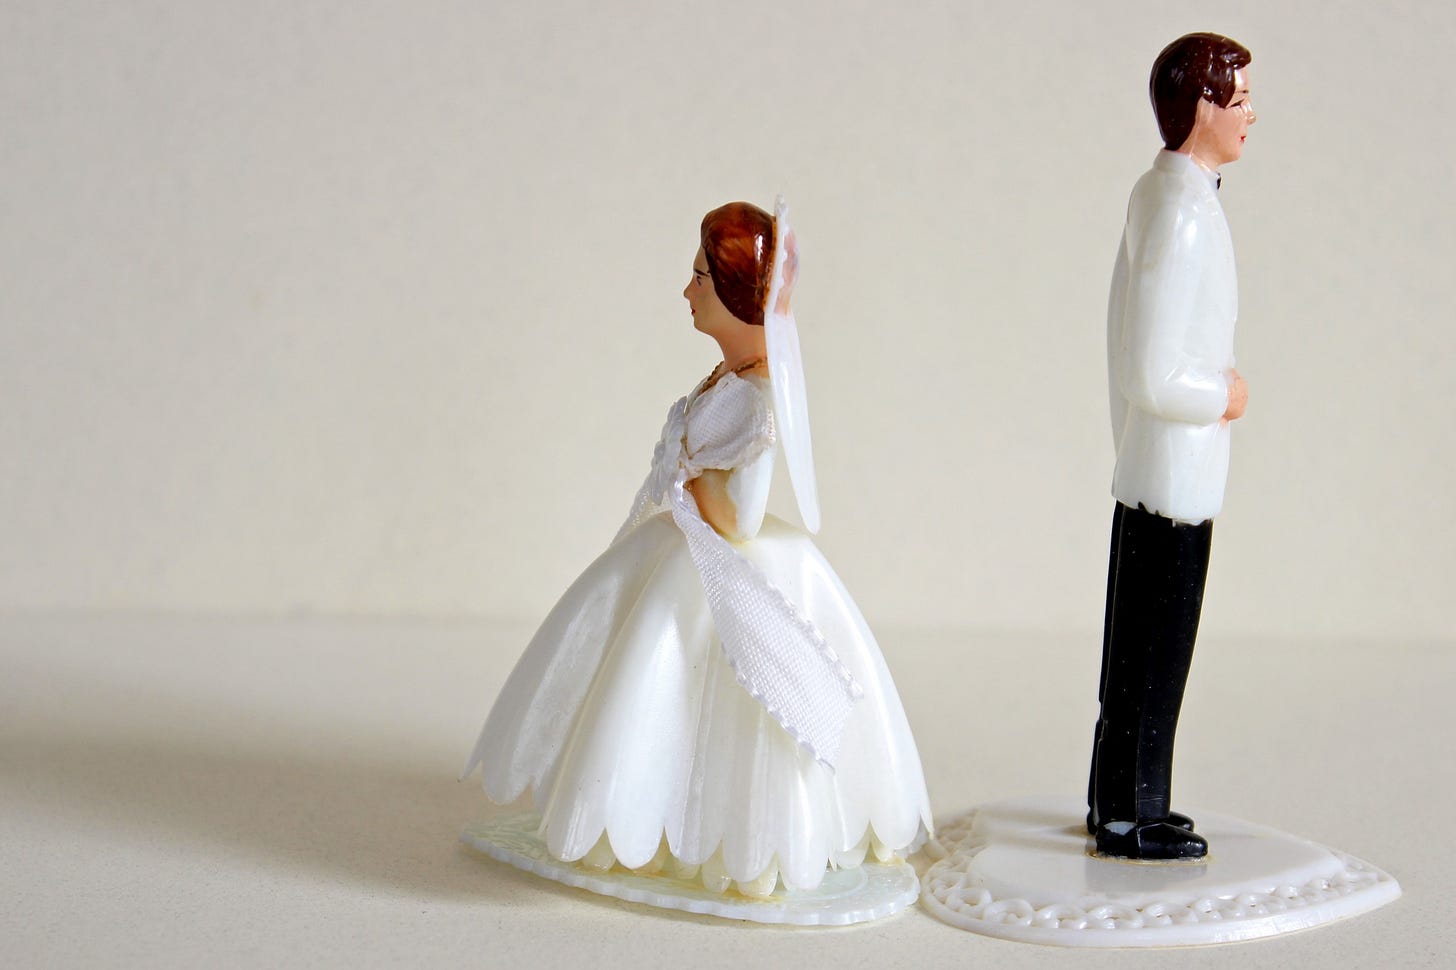 A man and woman wedding topper face away from one another.